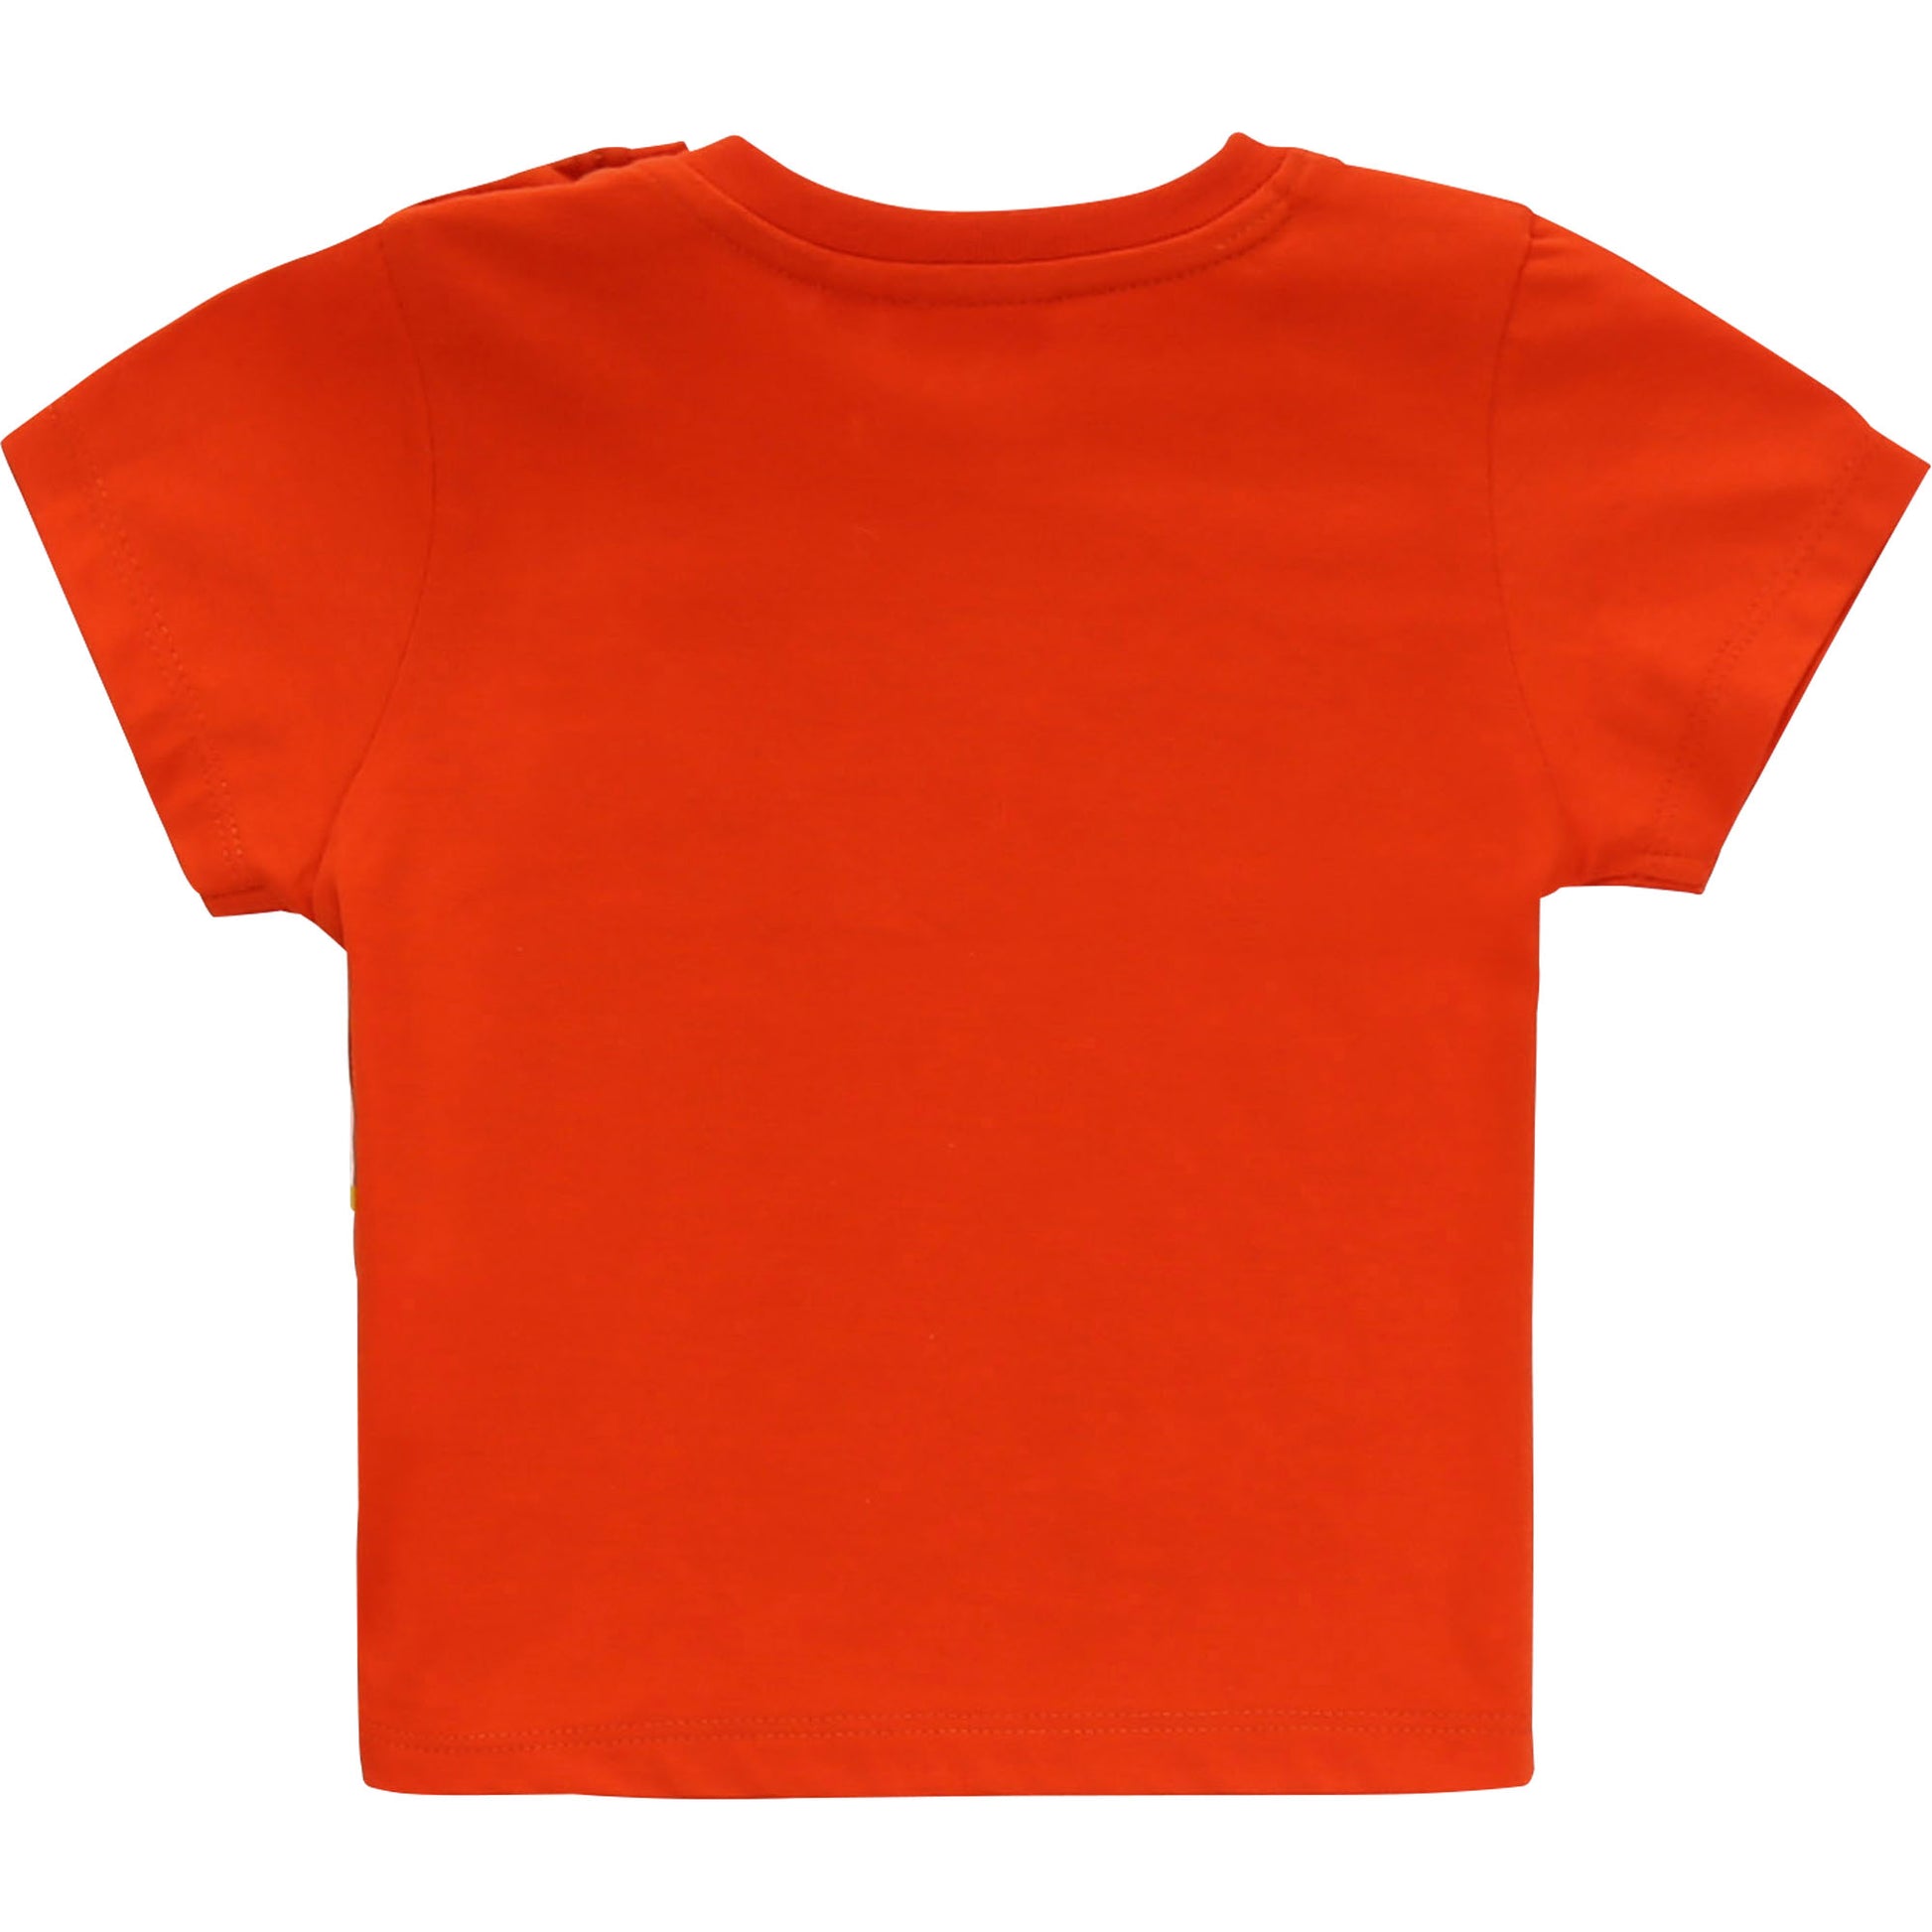 BABY SHORT SLEEVES TEE-SHIRT, BRIGHT RED - Cemarose Children's Fashion Boutique